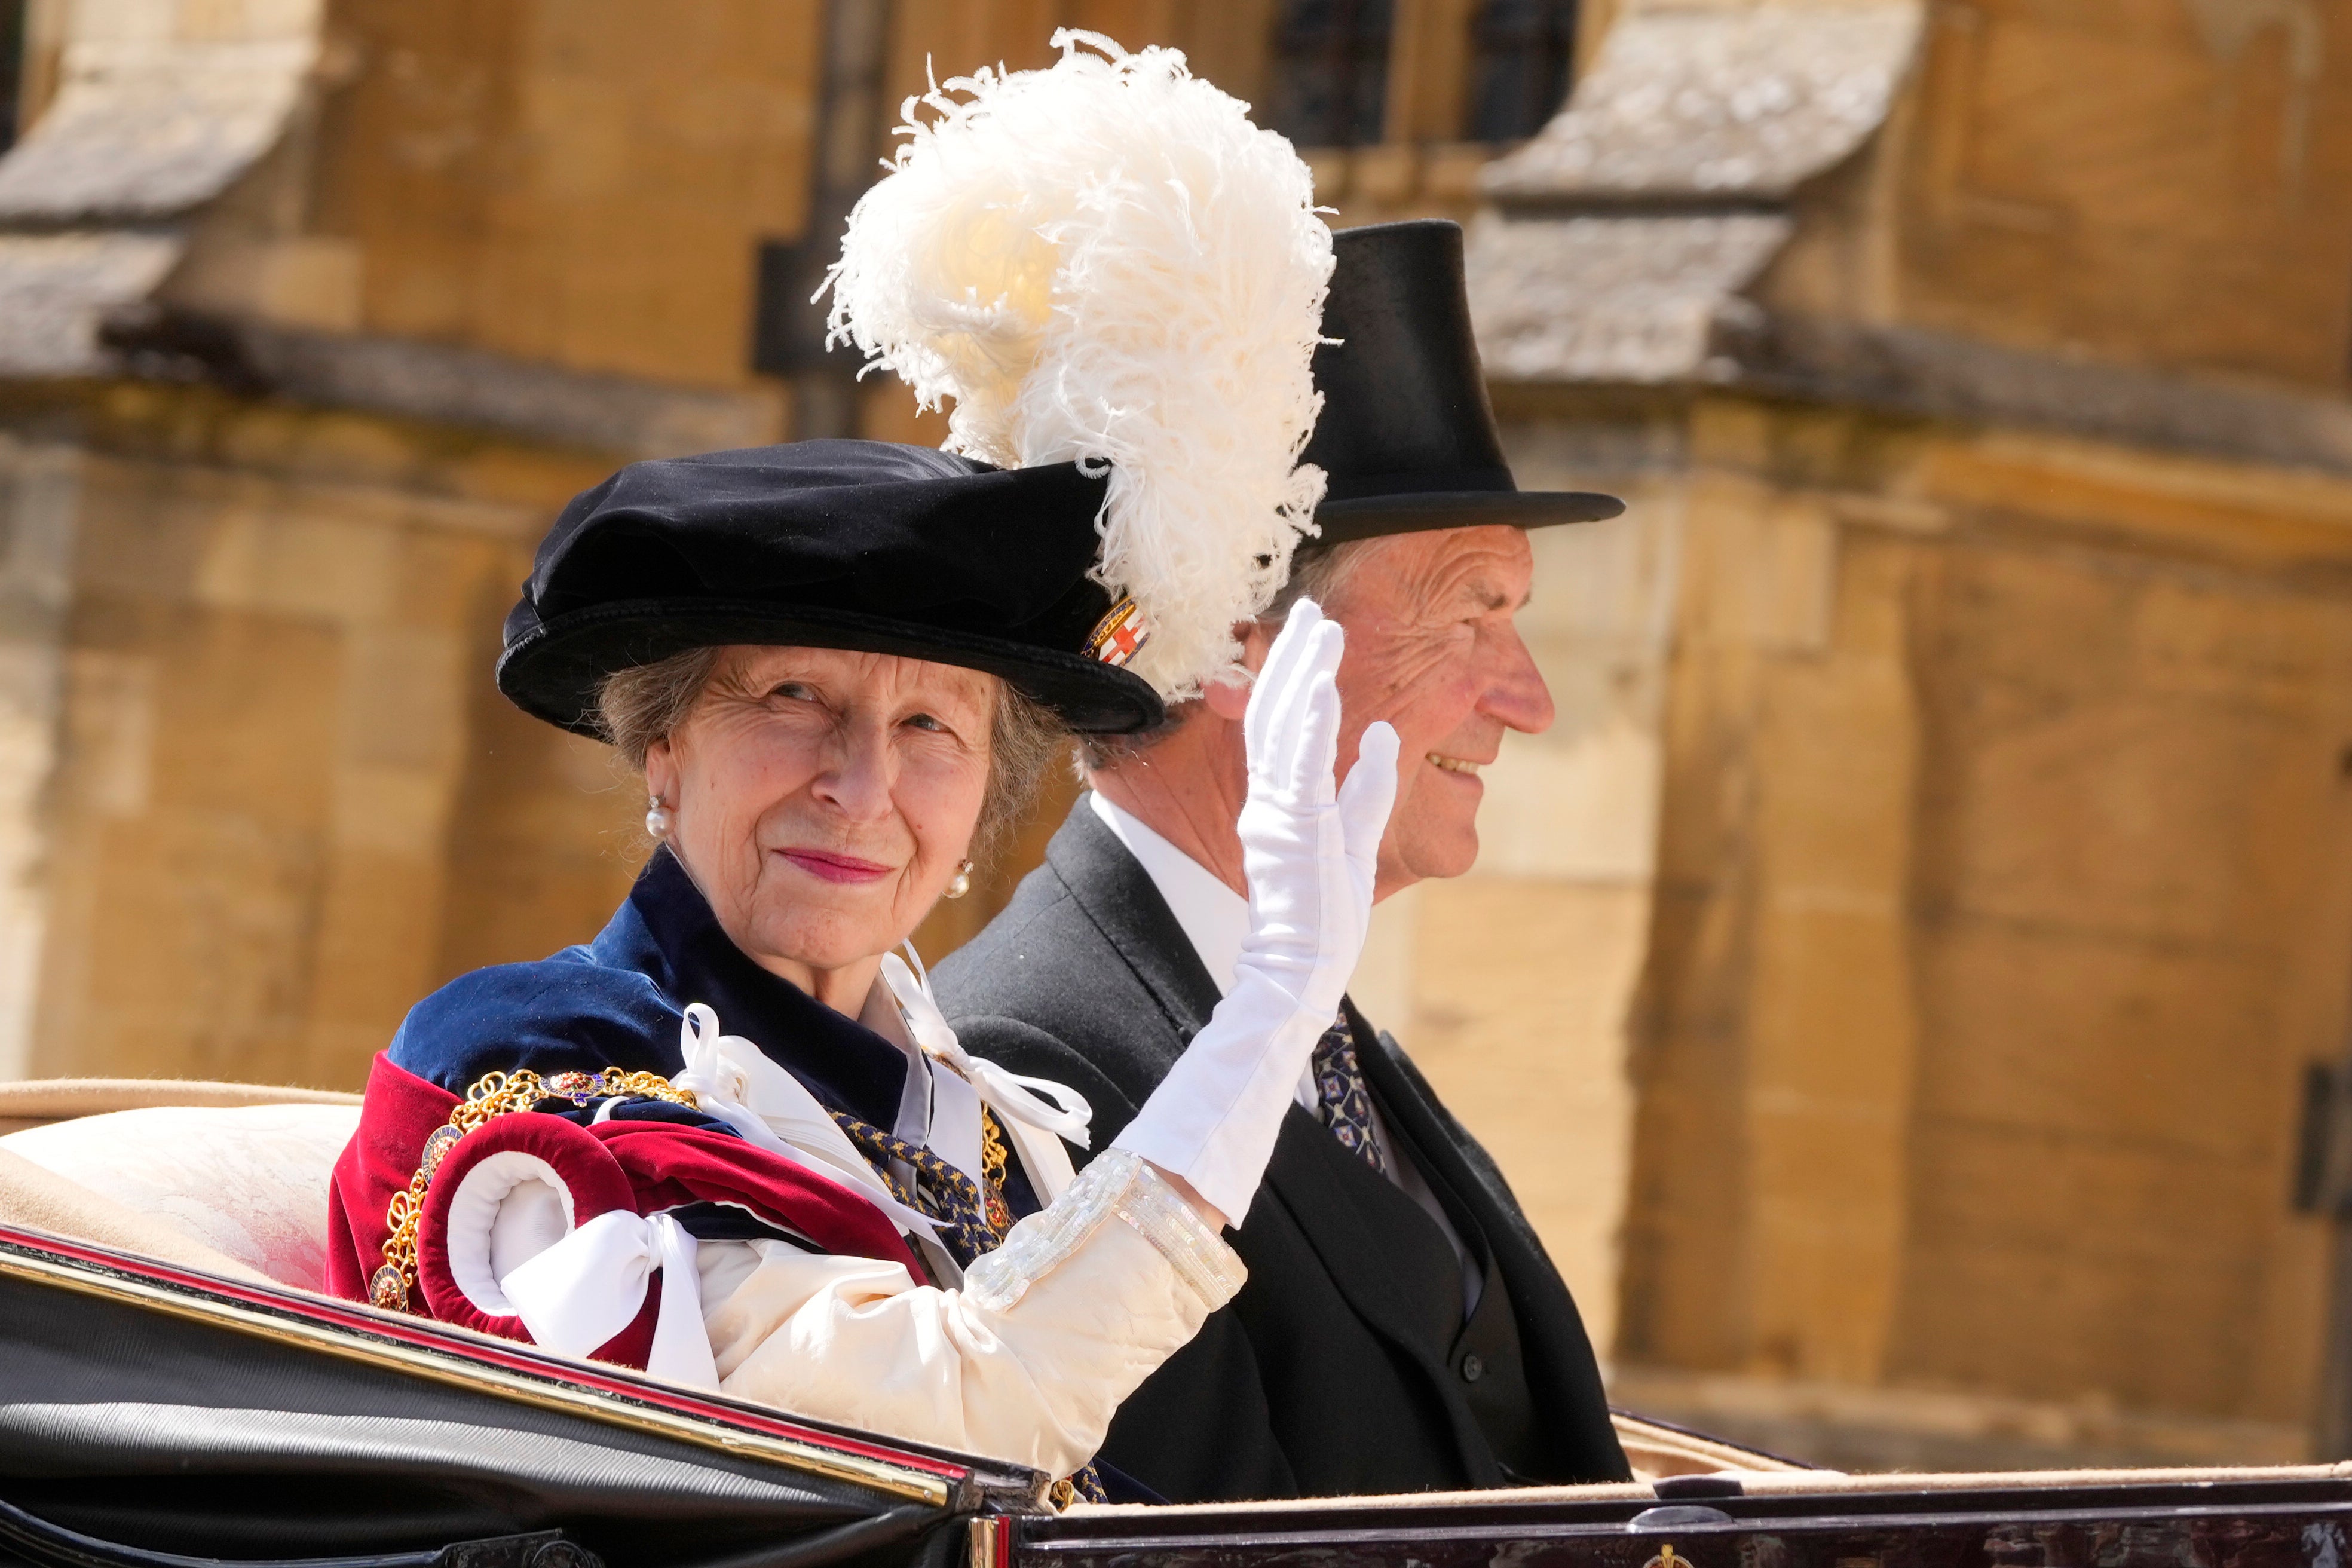 The Princess Royal, 73, was injured at her estate on Sunday evening.